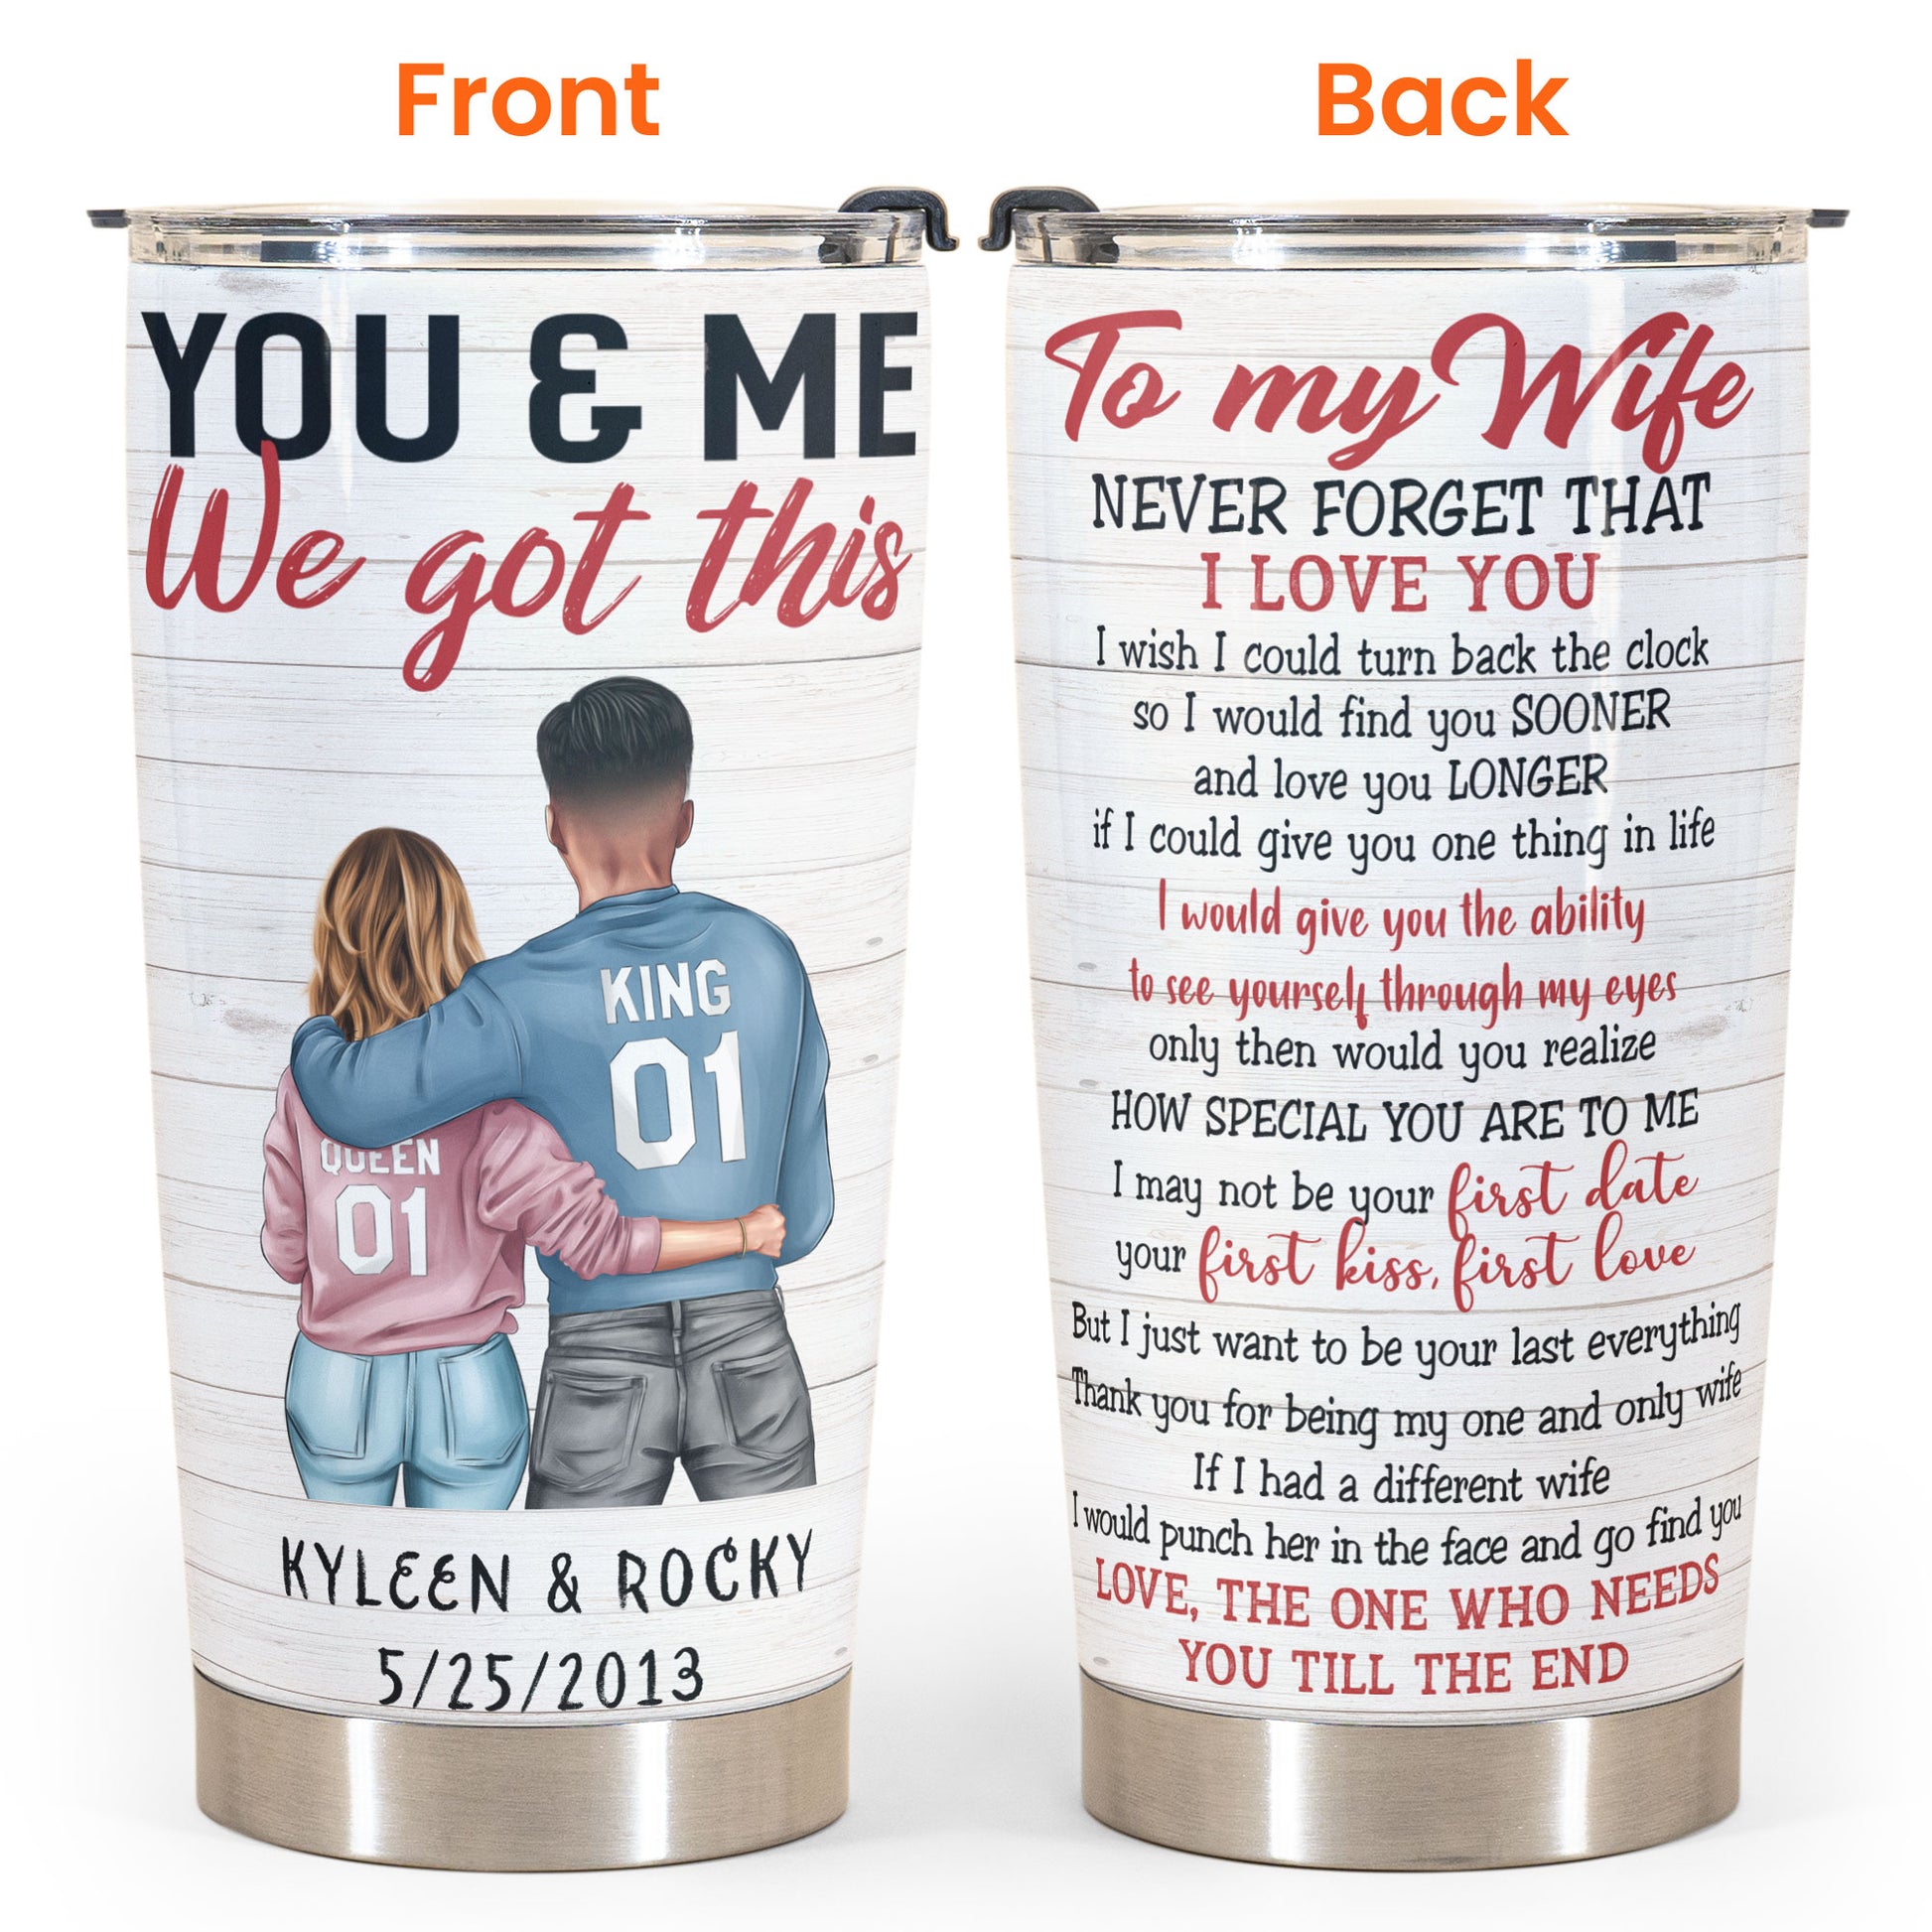 To My Mom, I Will Always Be Your Little Boy - Tumbler Cup – Macorner